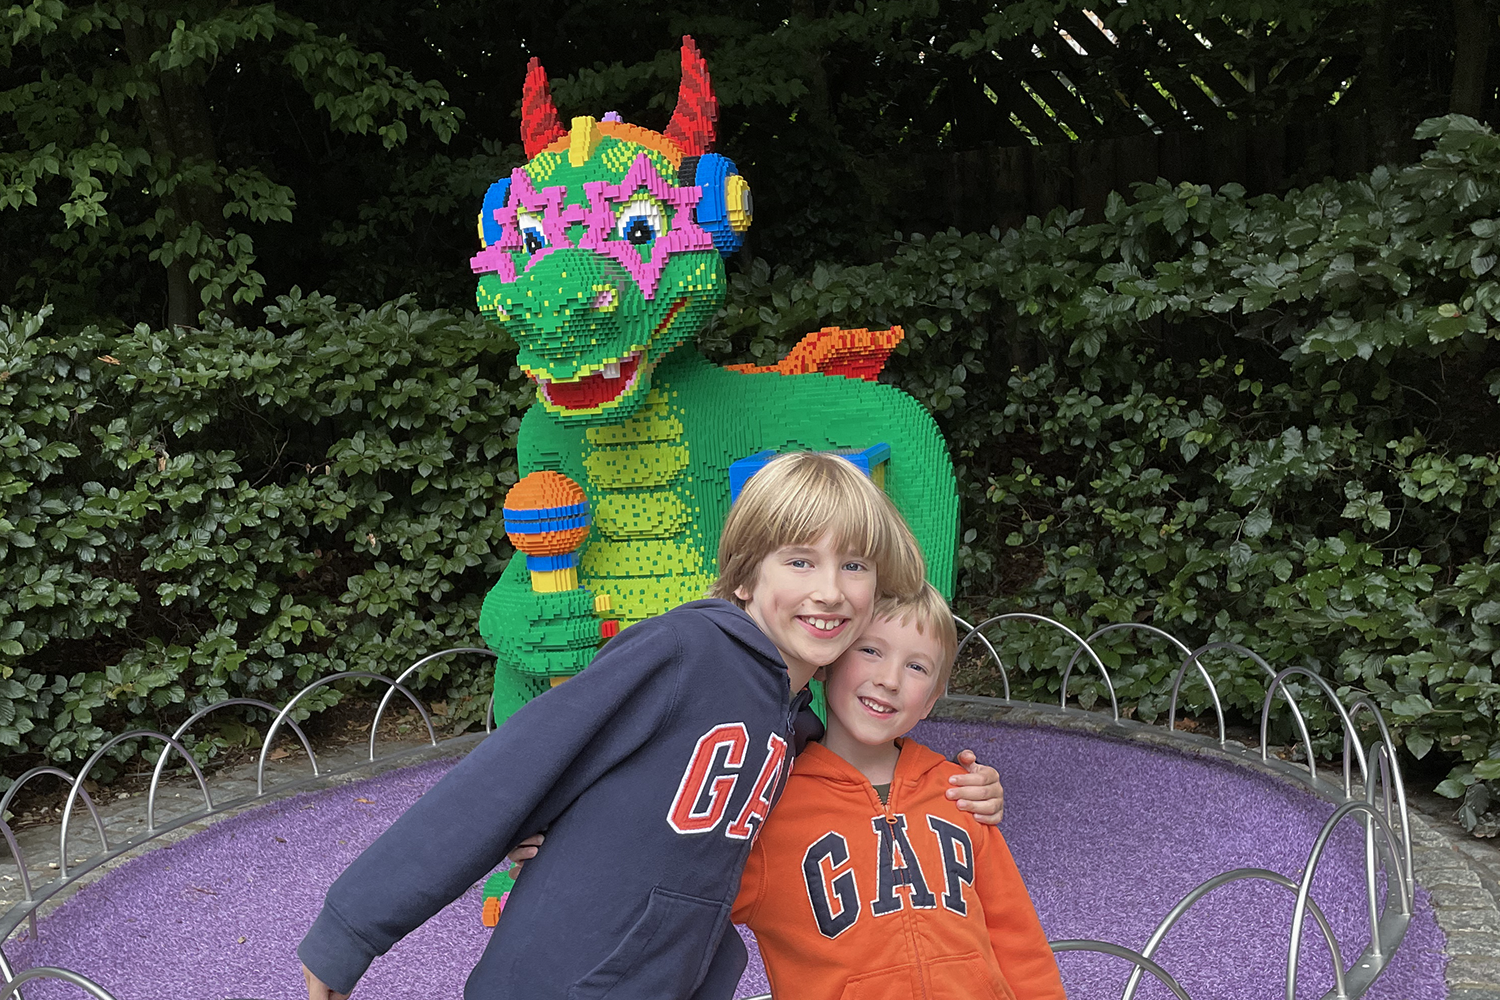 Toby and Gabe in front of a Lego dragon at Legoland Windsor